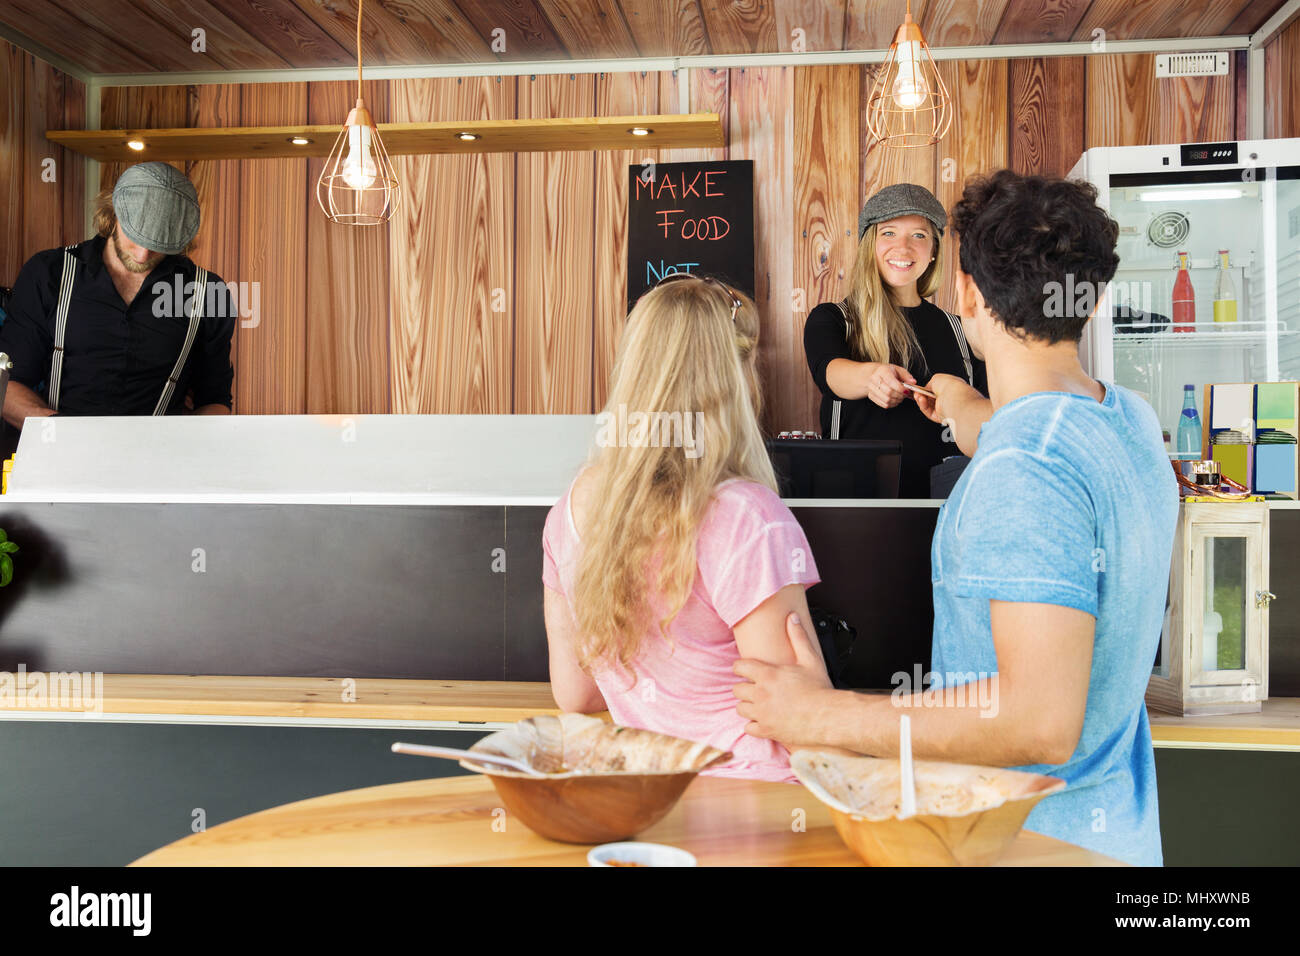 Customers Paying At Food Truck Stock Photo 183143783 Alamy